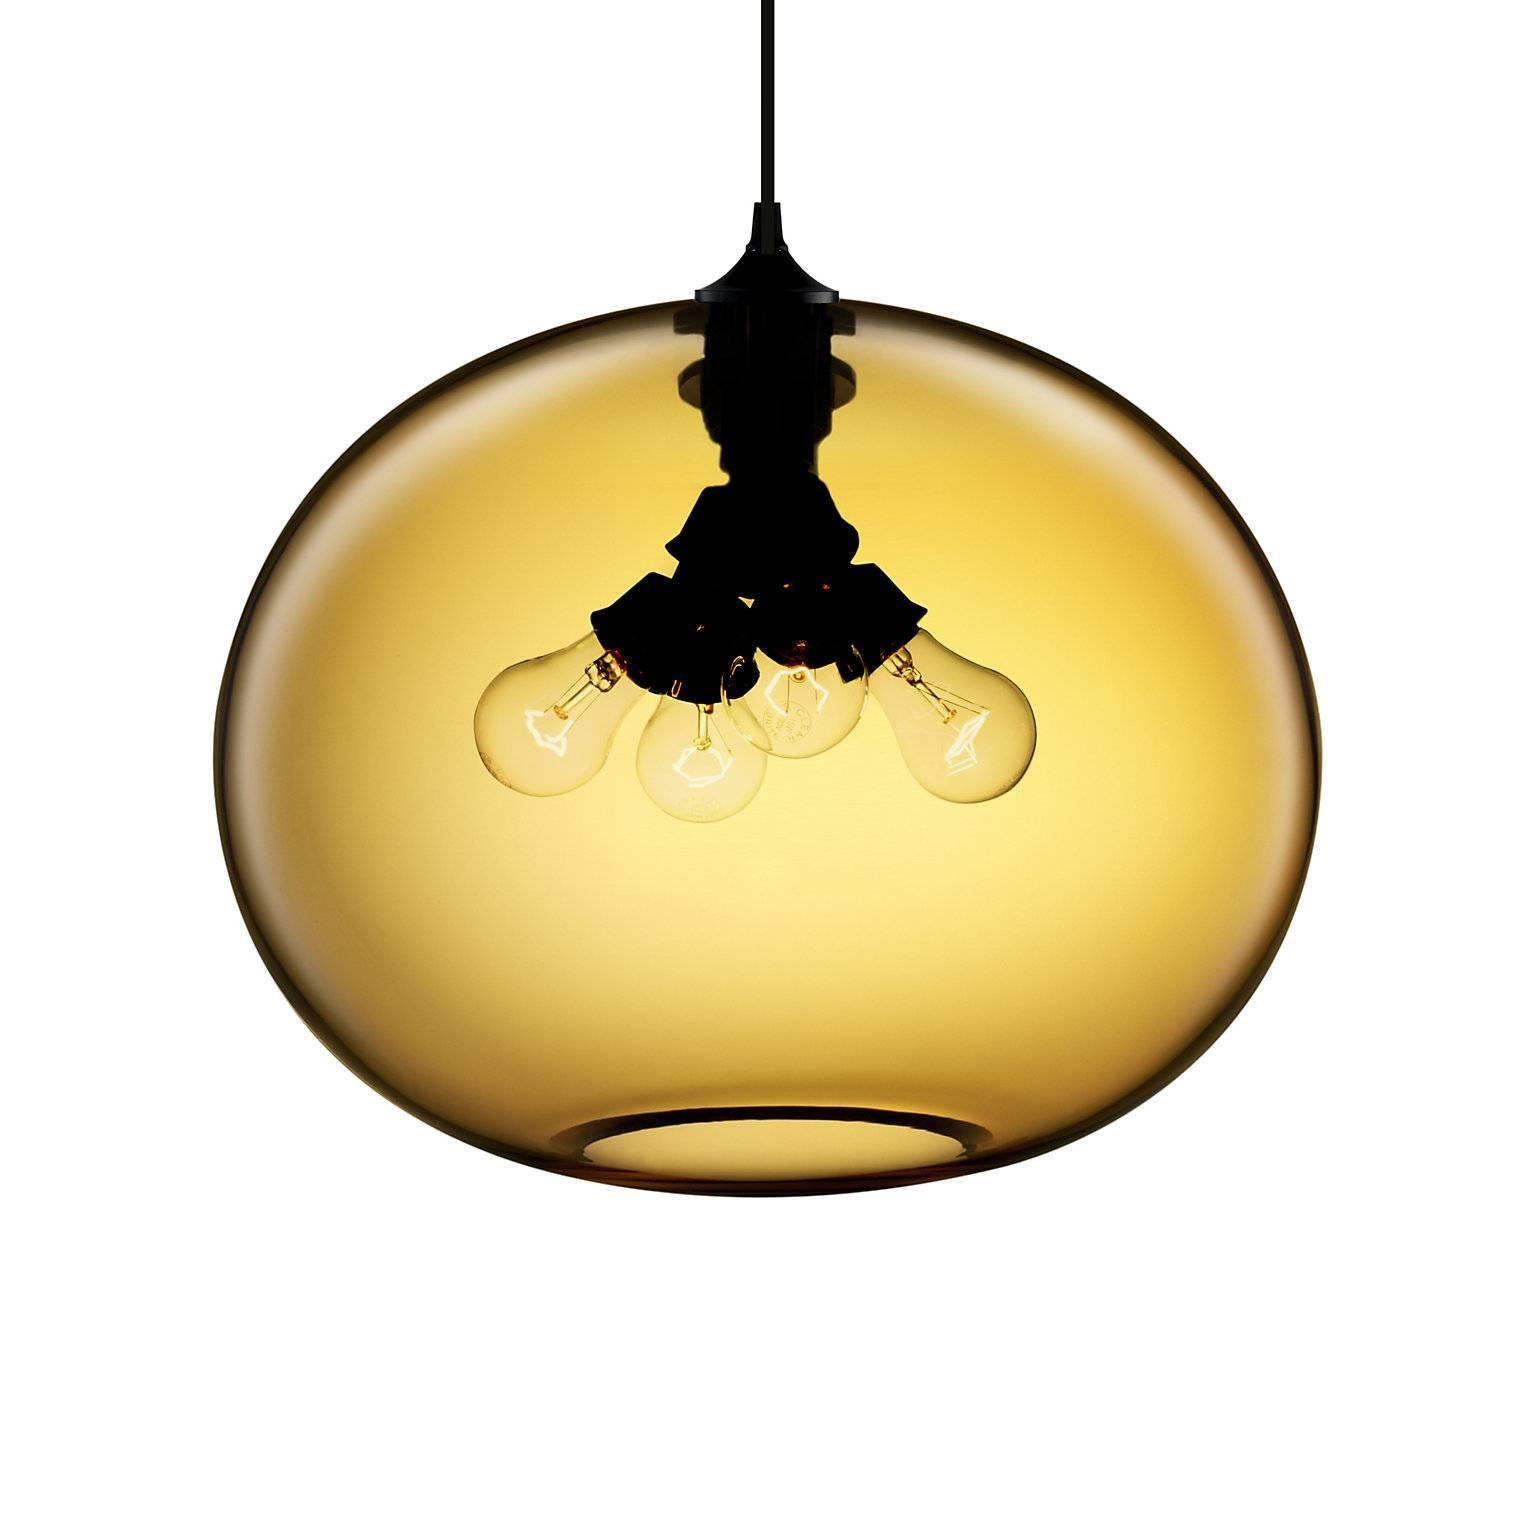 The allure of the abundant Terra is the presence of four bulbs at the pendant’s centre, radiating rich, ambient light. Every single glass pendant light that comes from Niche is hand-blown by real human beings in a state-of-the-art studio located in